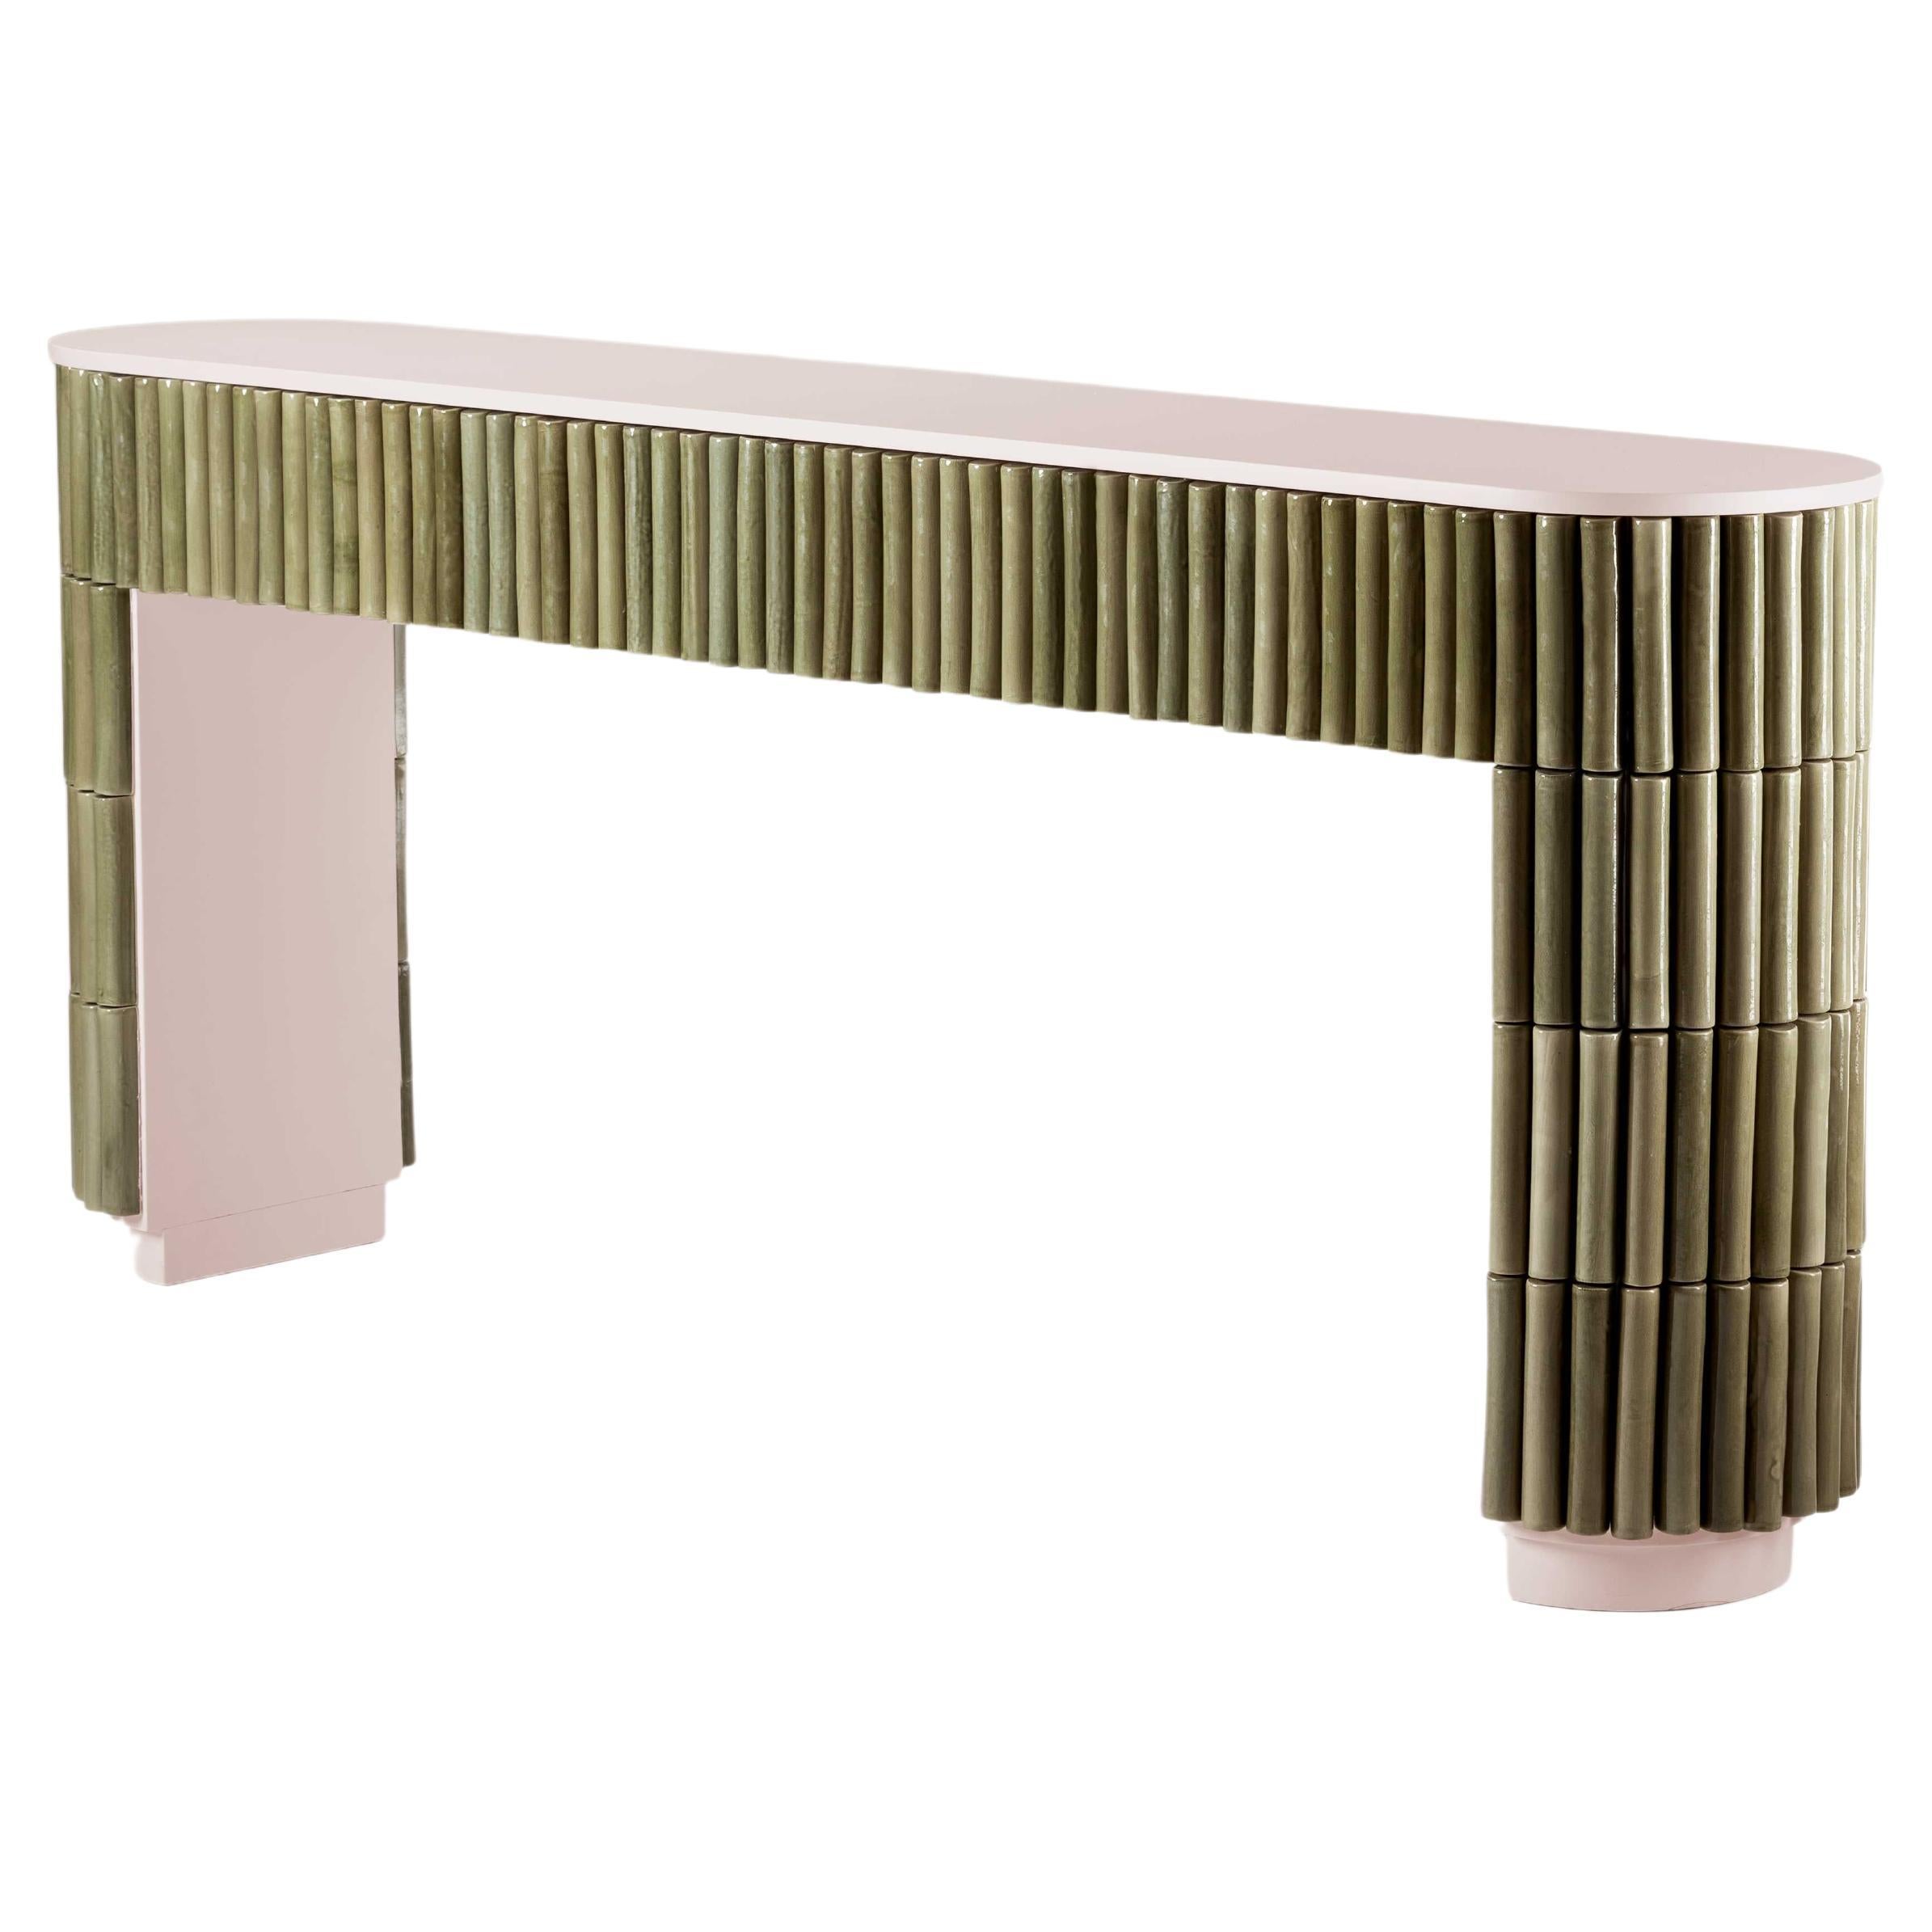 DOOQ Organic Modern Handmade Nouvelle Vague Console Table Powder and Lime